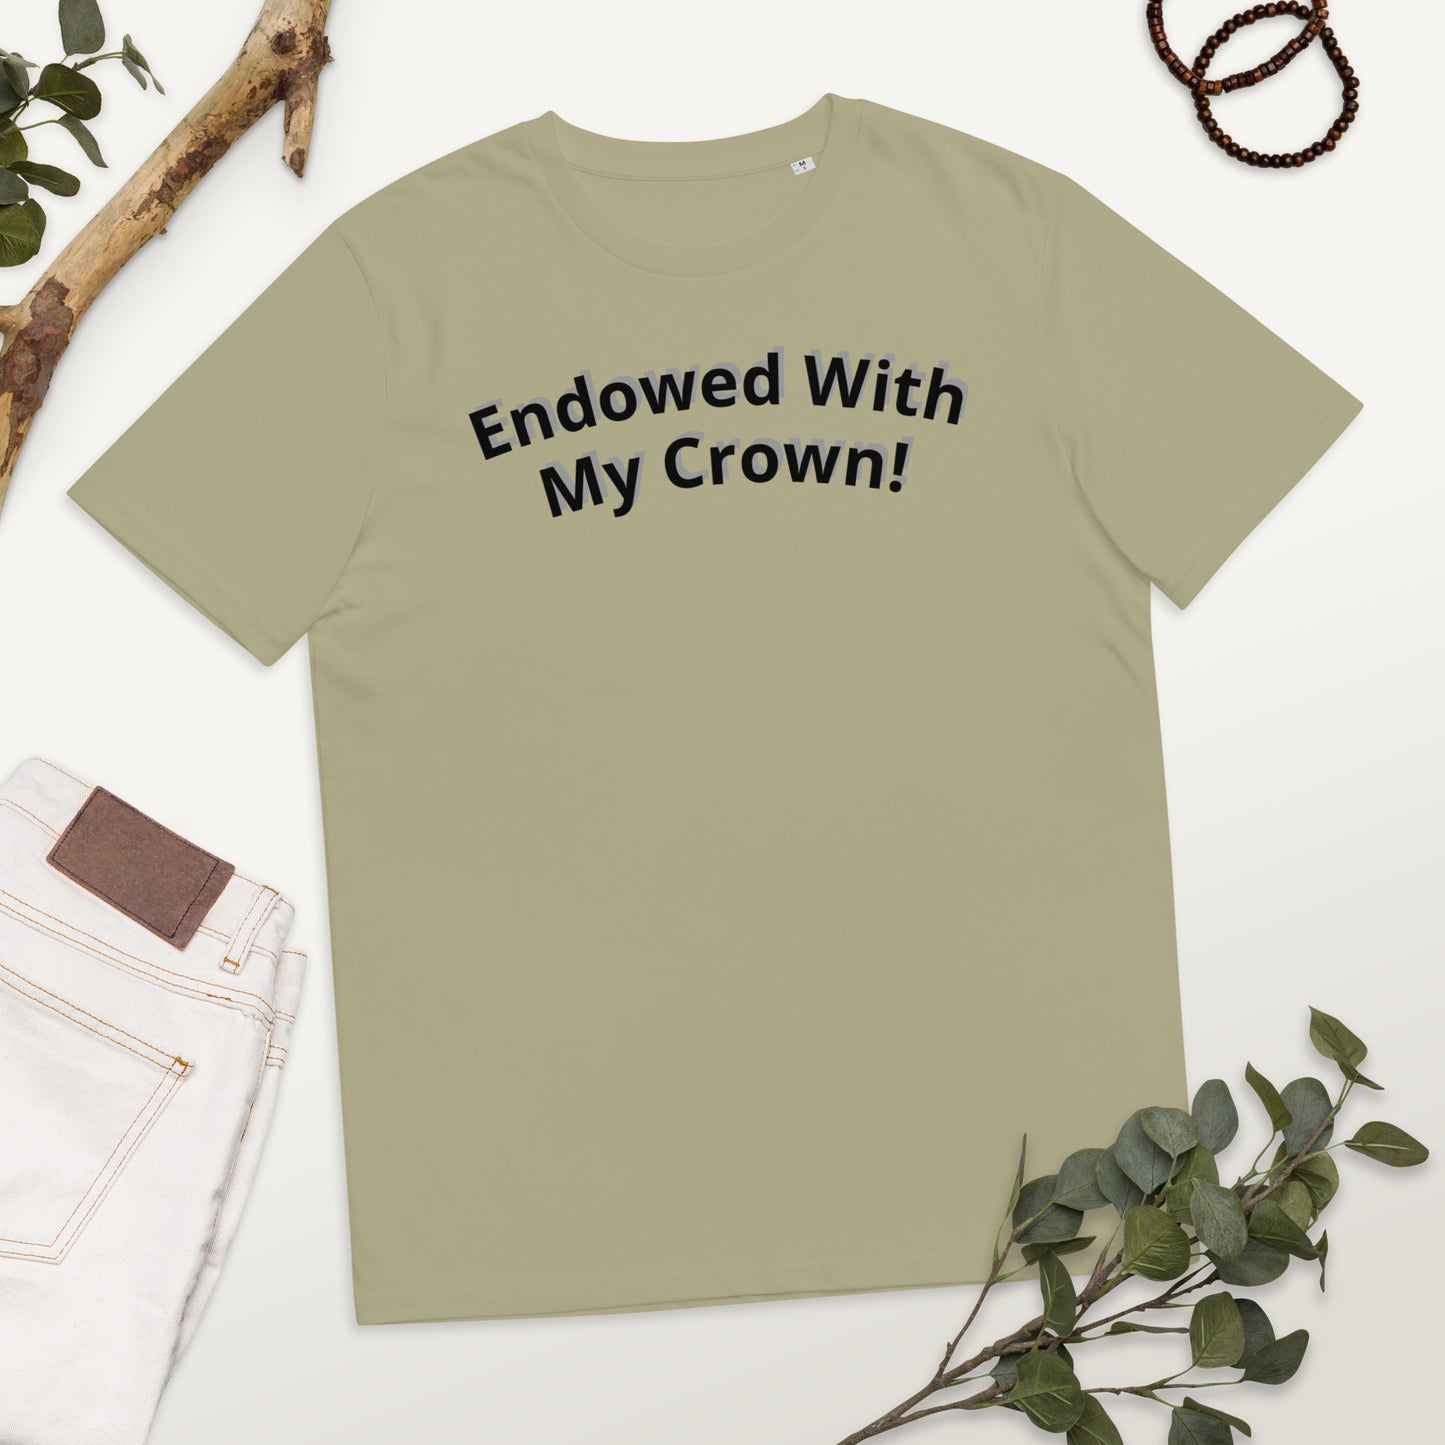 Endowed With My Crown!  Unisex organic cotton t-shirt